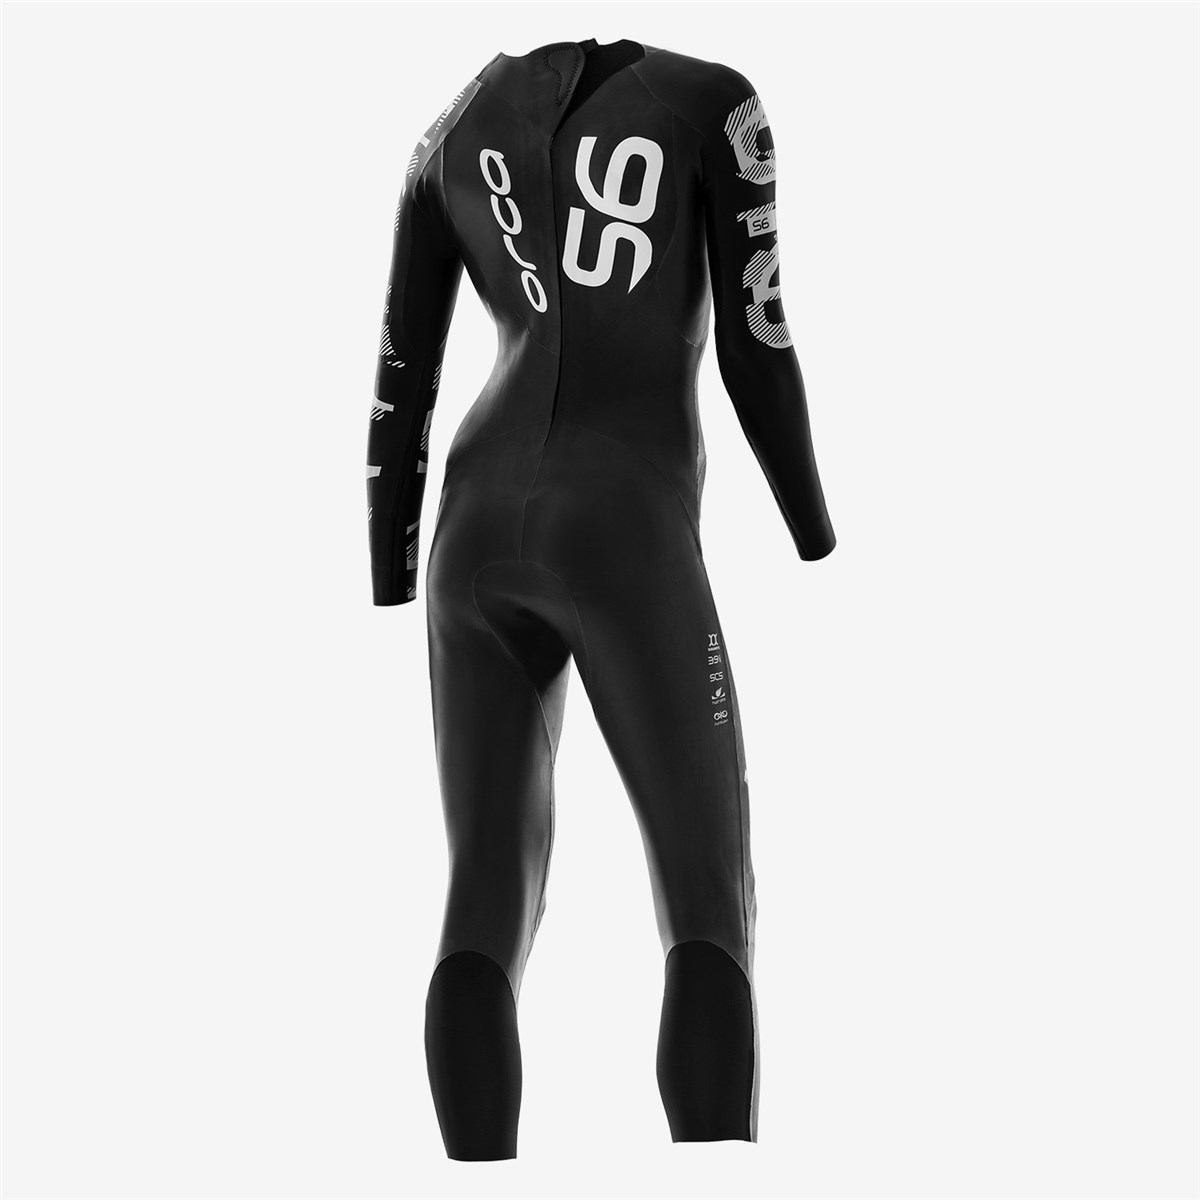 Orca S6 Womens Full Sleeve Wetsuit